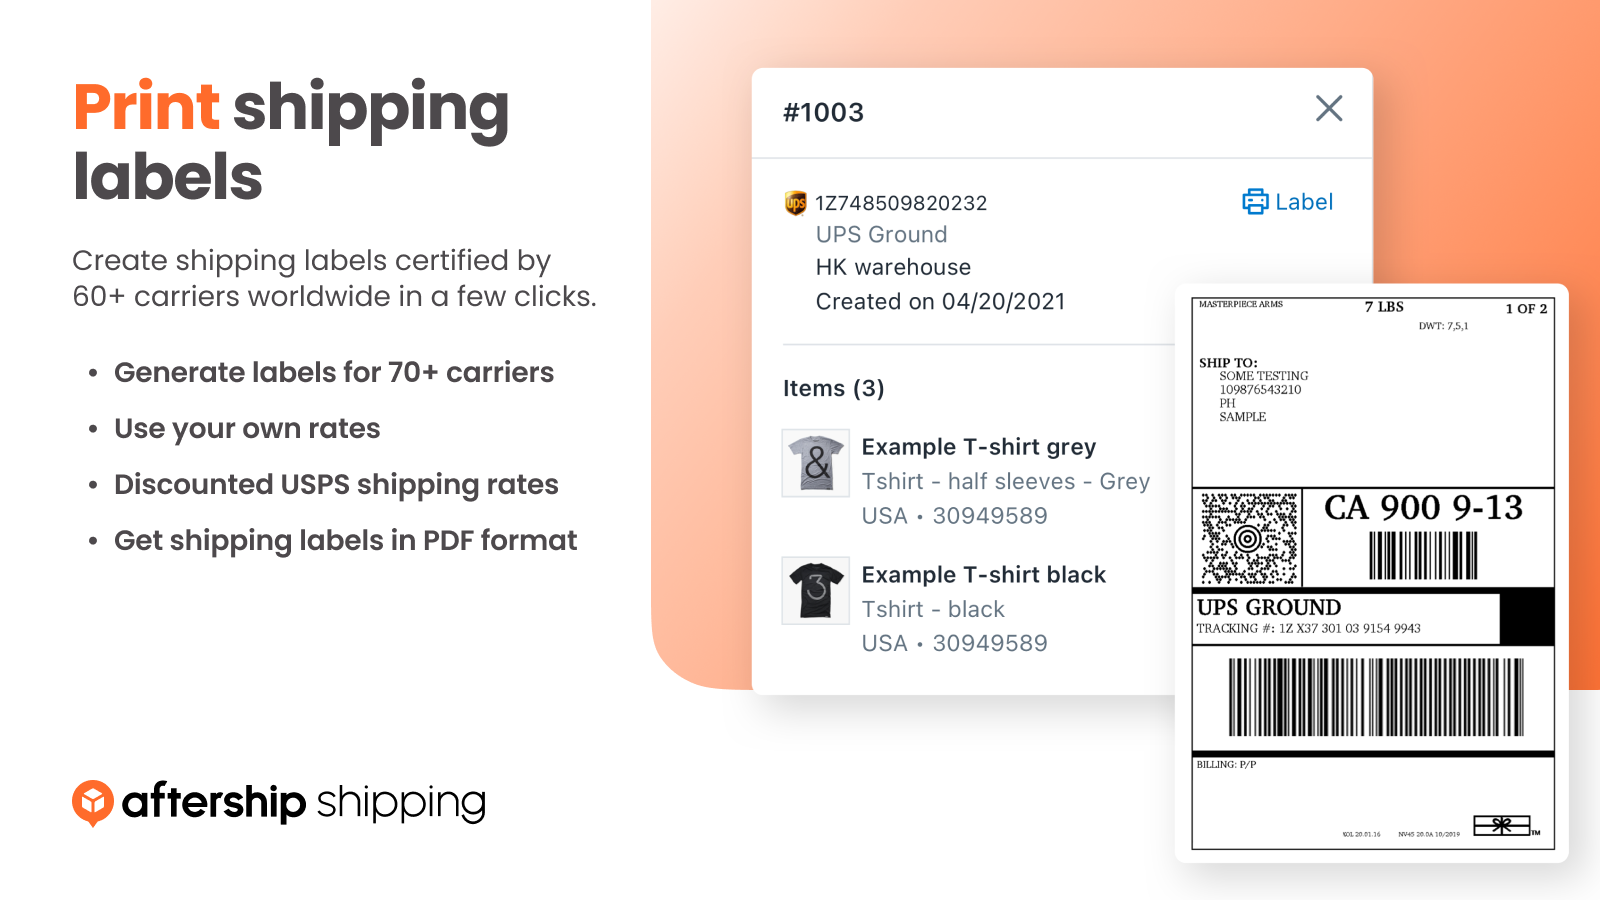 Create shipping labels certified by 60+ carriers